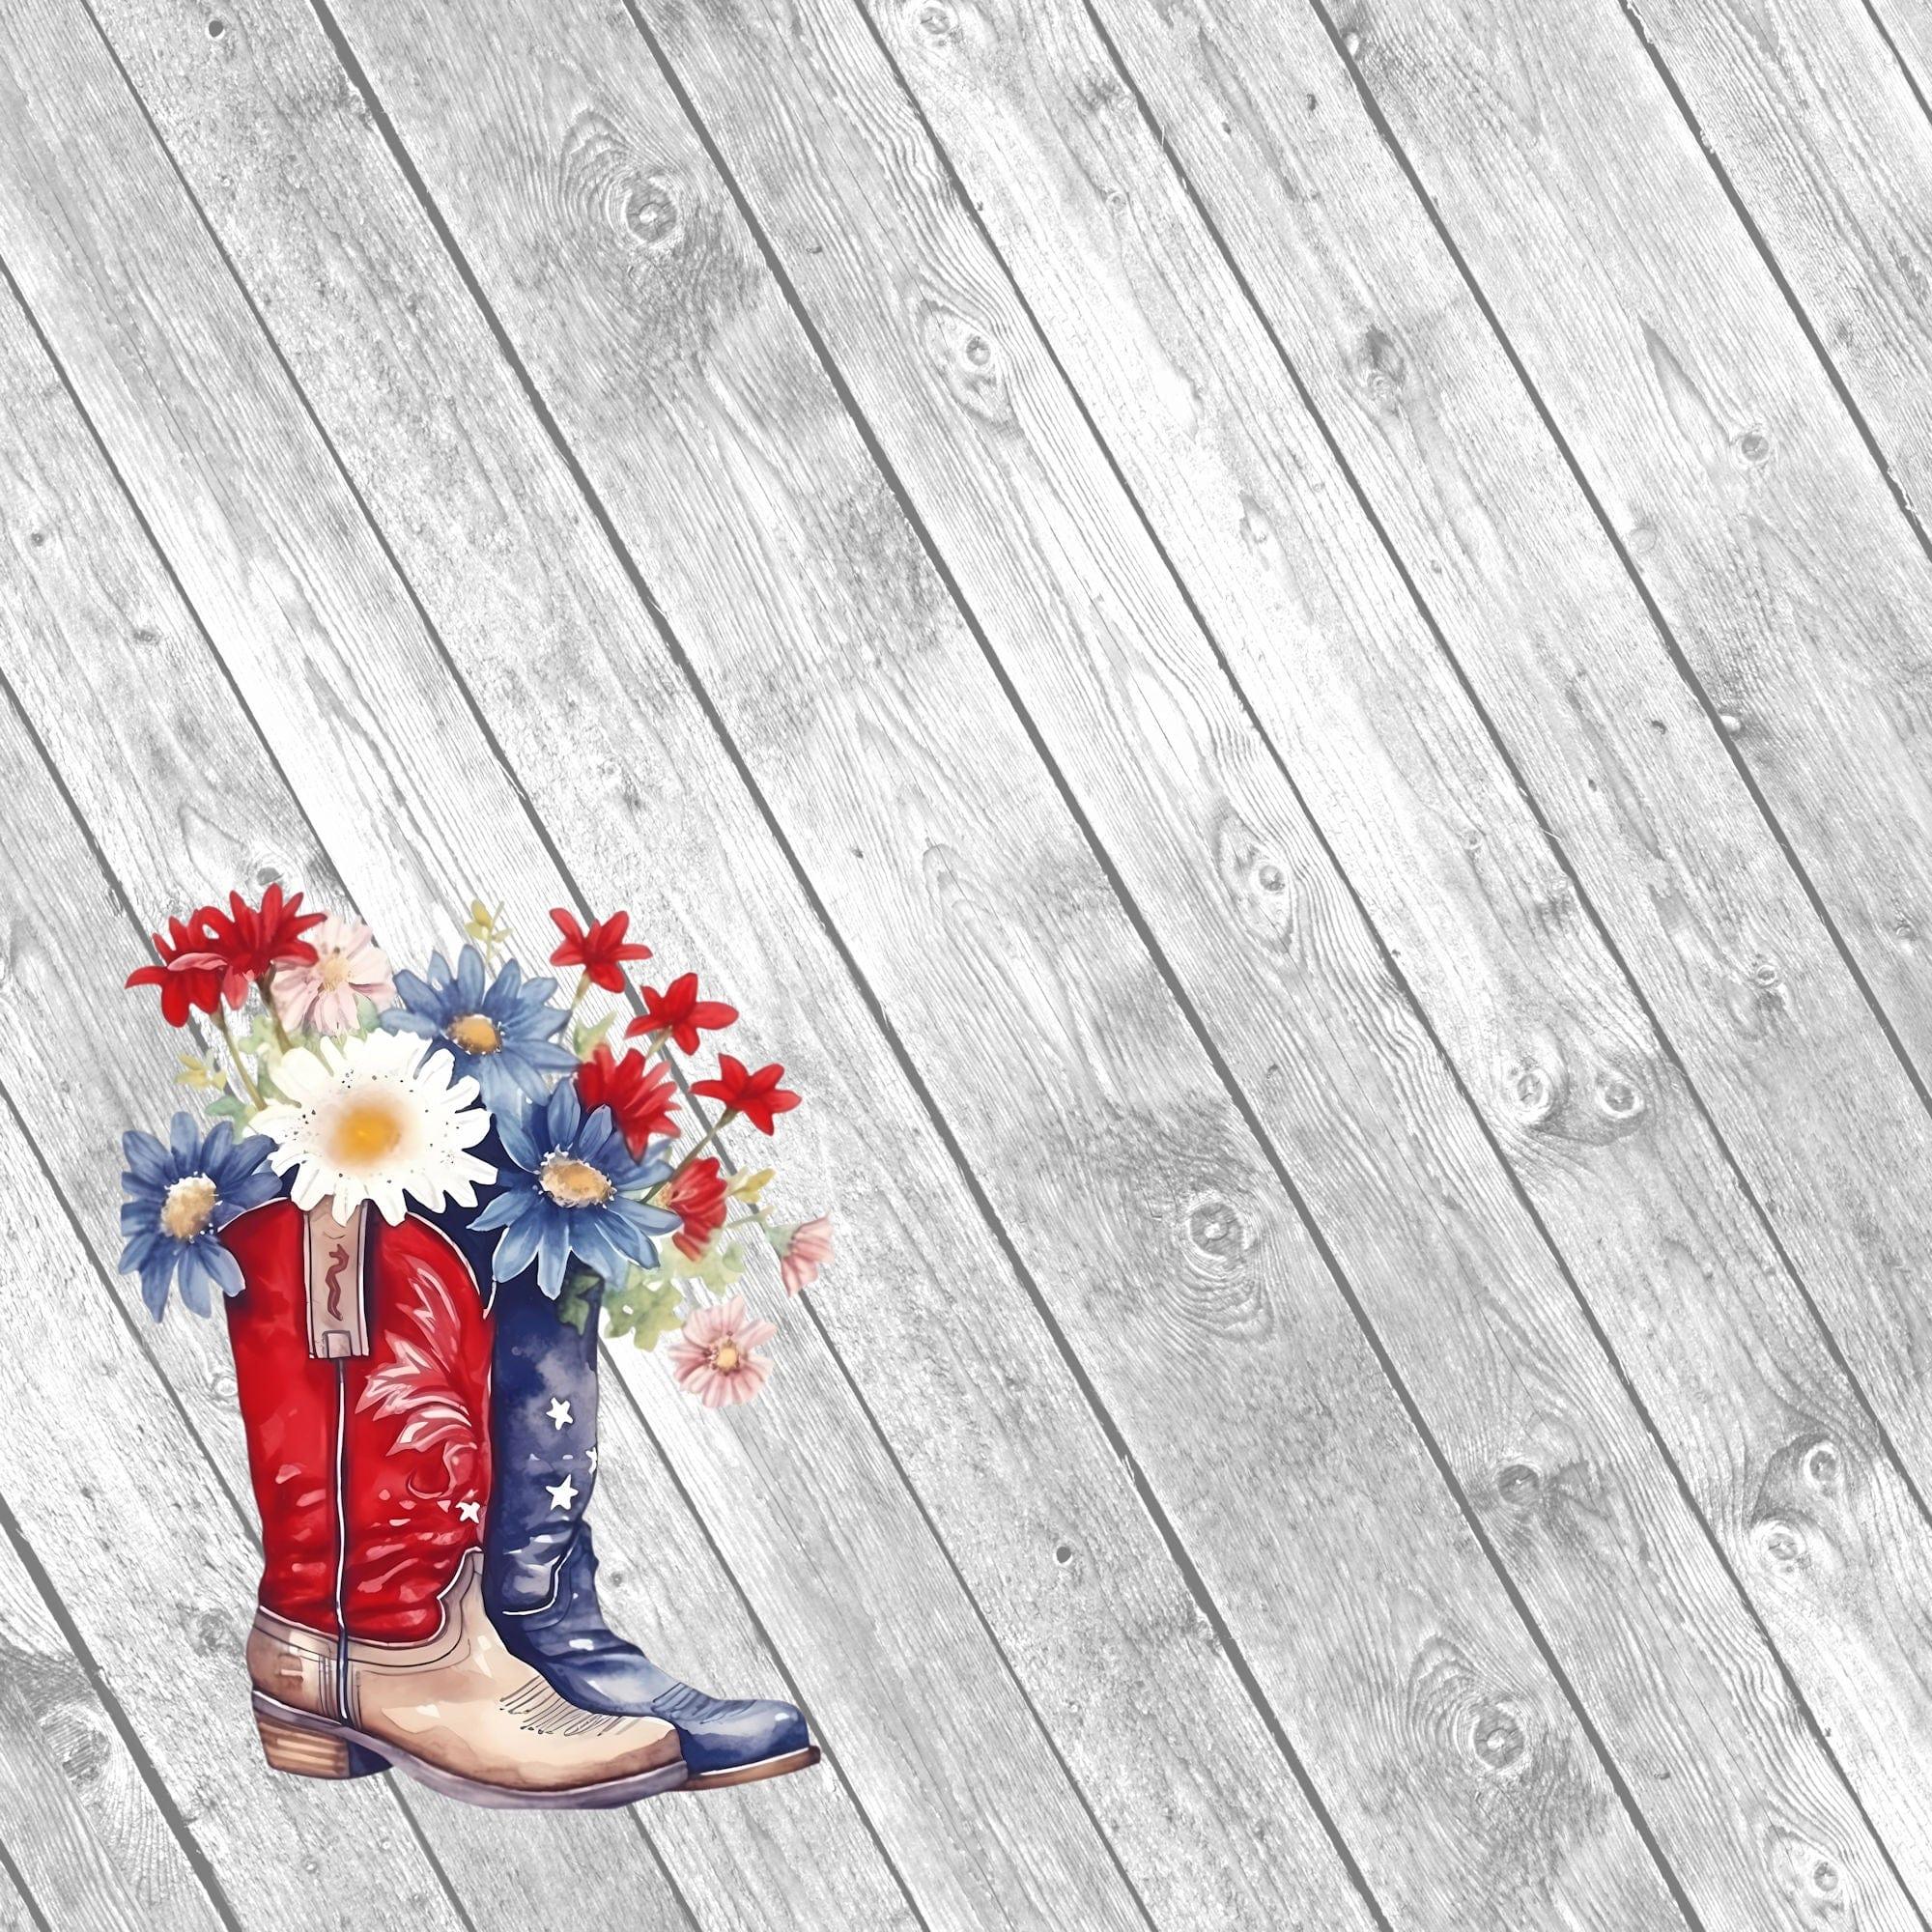 Star Spangled Spurs Collection Cowboy Boots 12 x 12 Double-Sided Scrapbook Paper by SSC Designs - Scrapbook Supply Companies